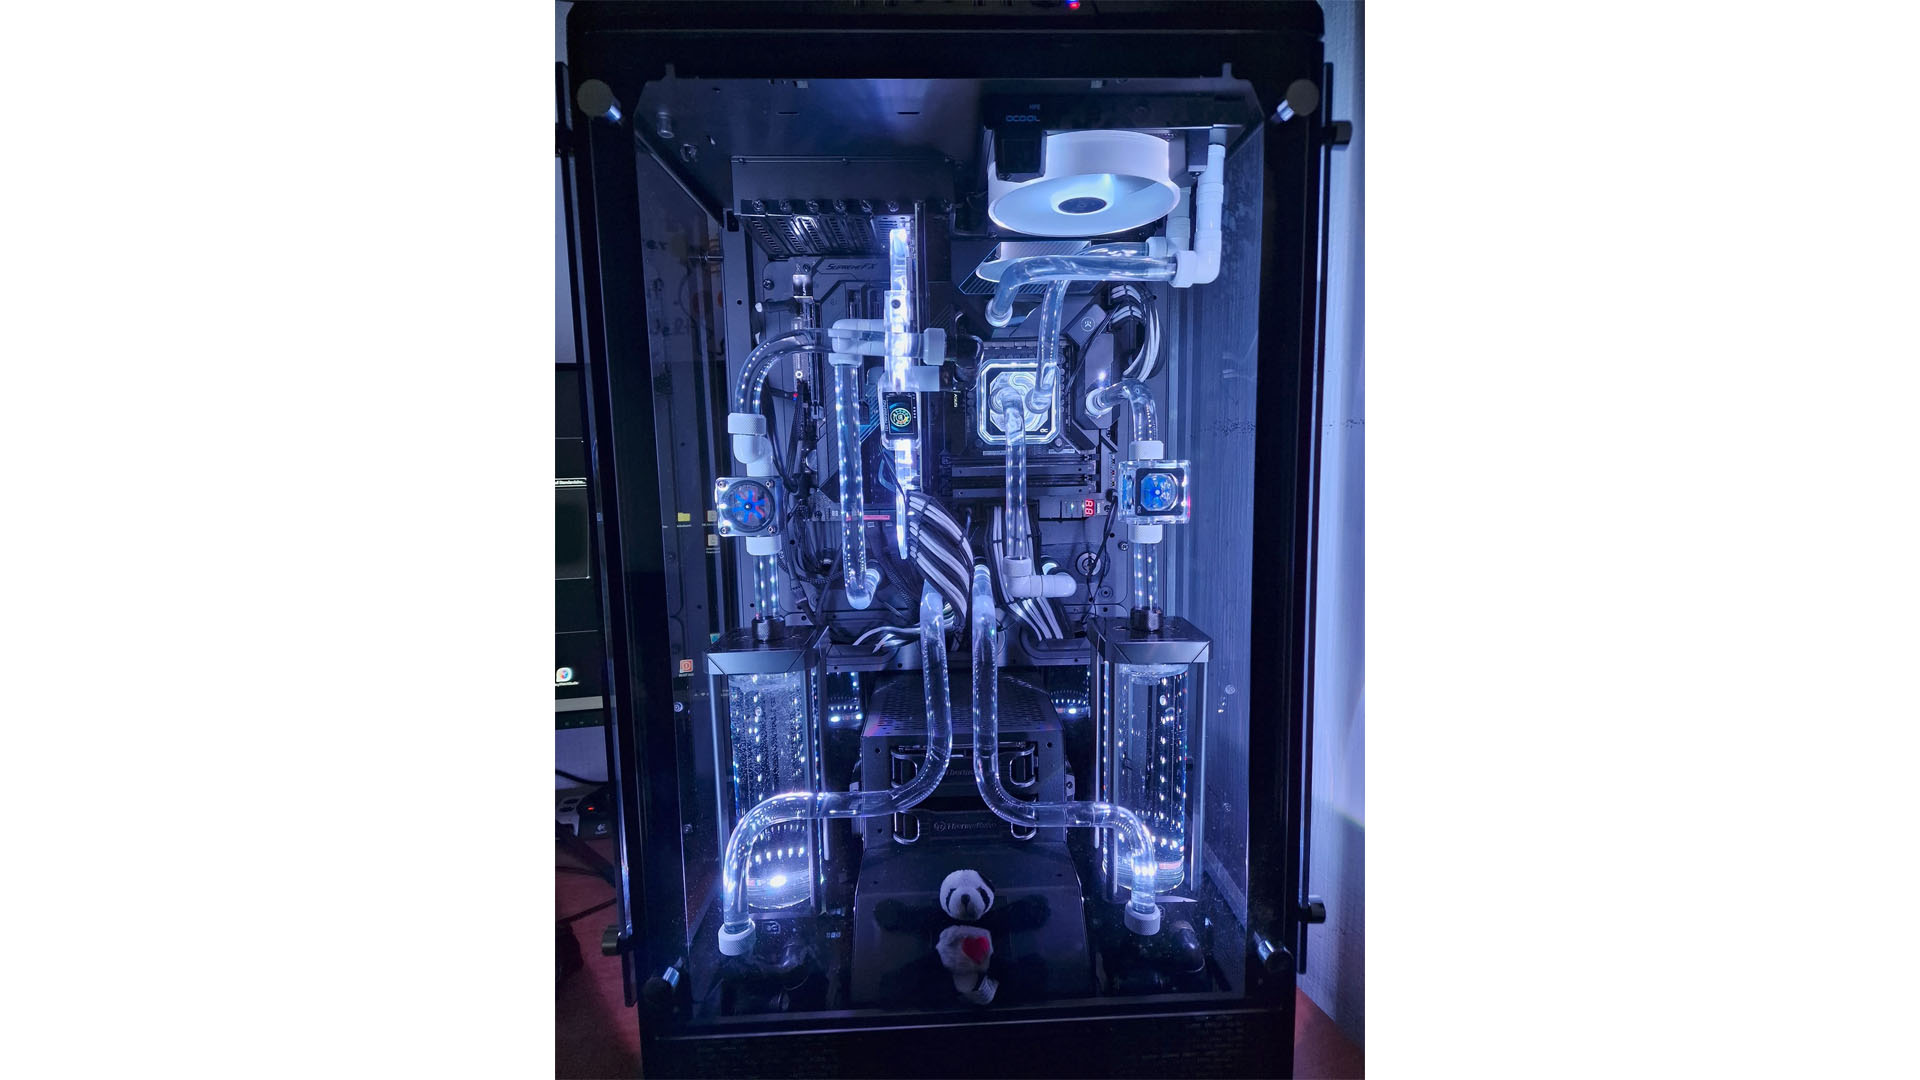 The dual watercooled gaming PC inside a Tower 900 